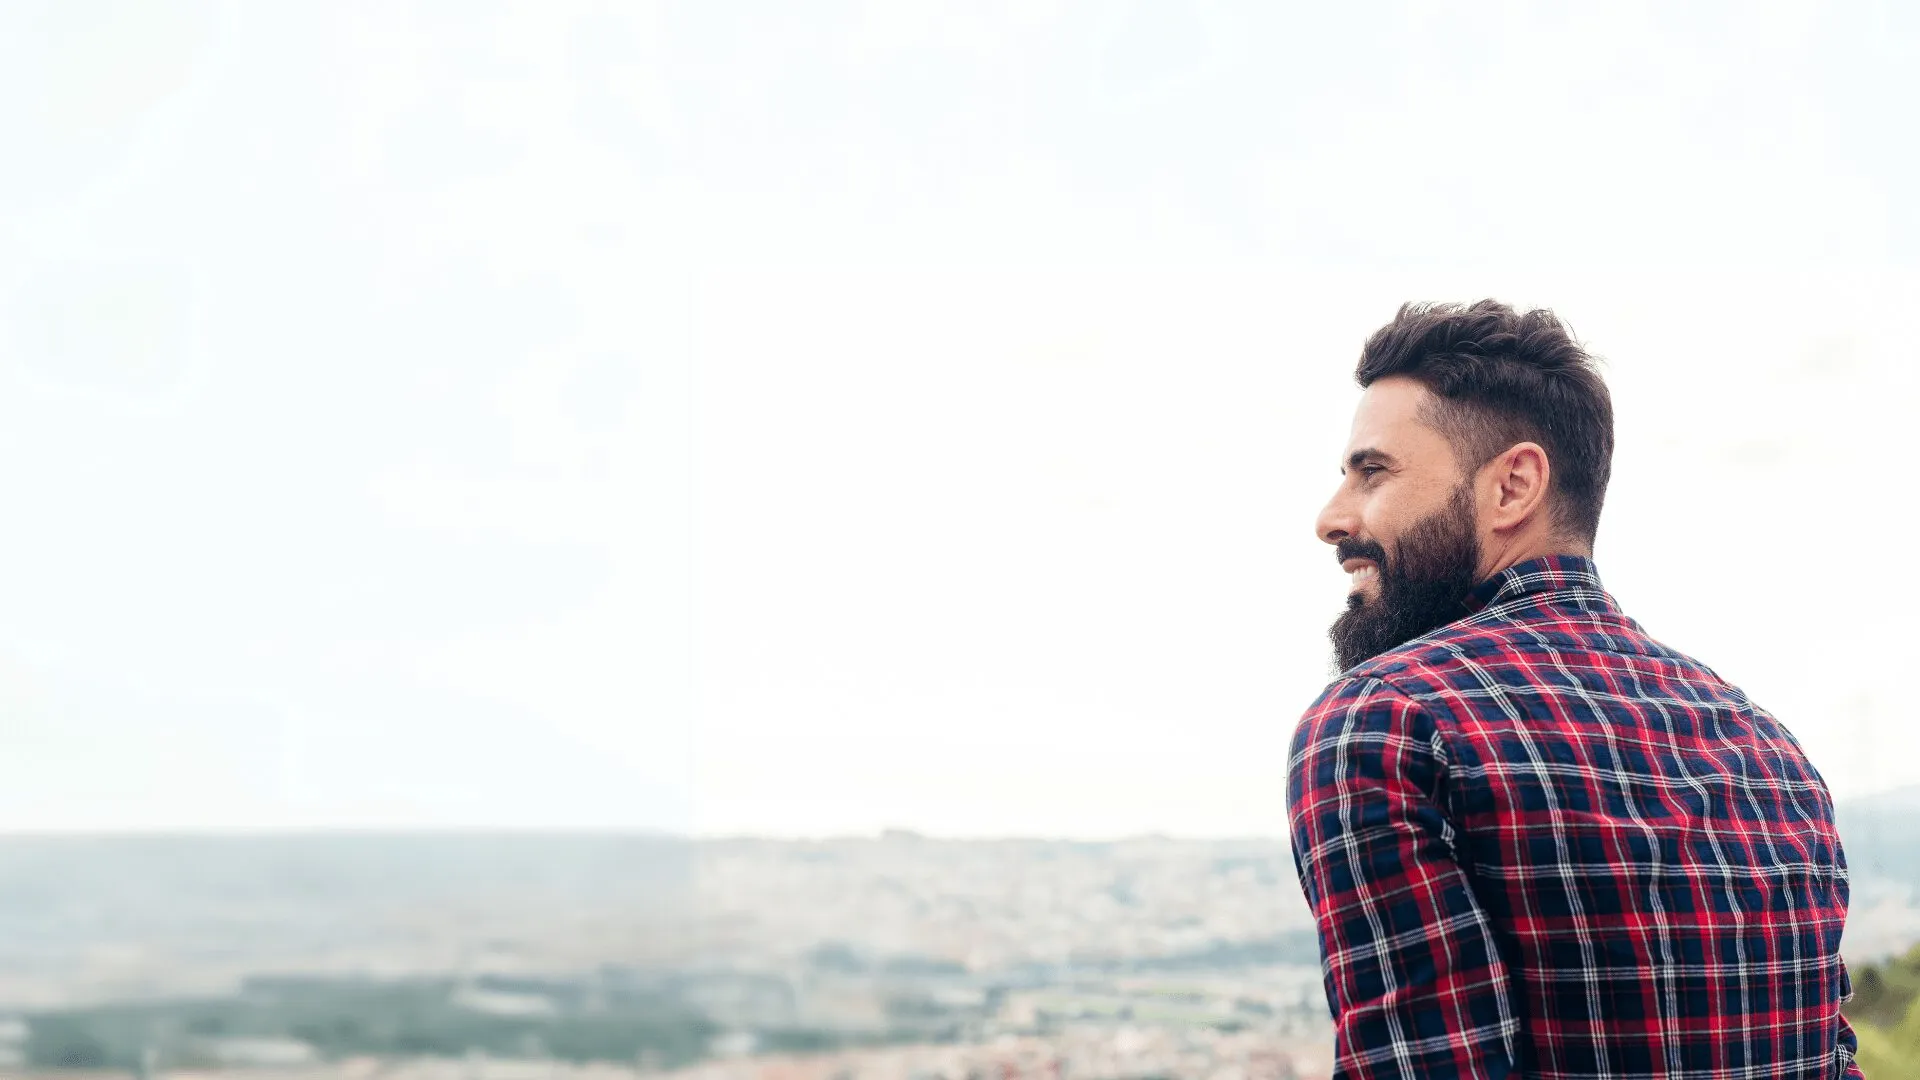 A smiling man with a beard and plaid shirt gazing over a cityscape